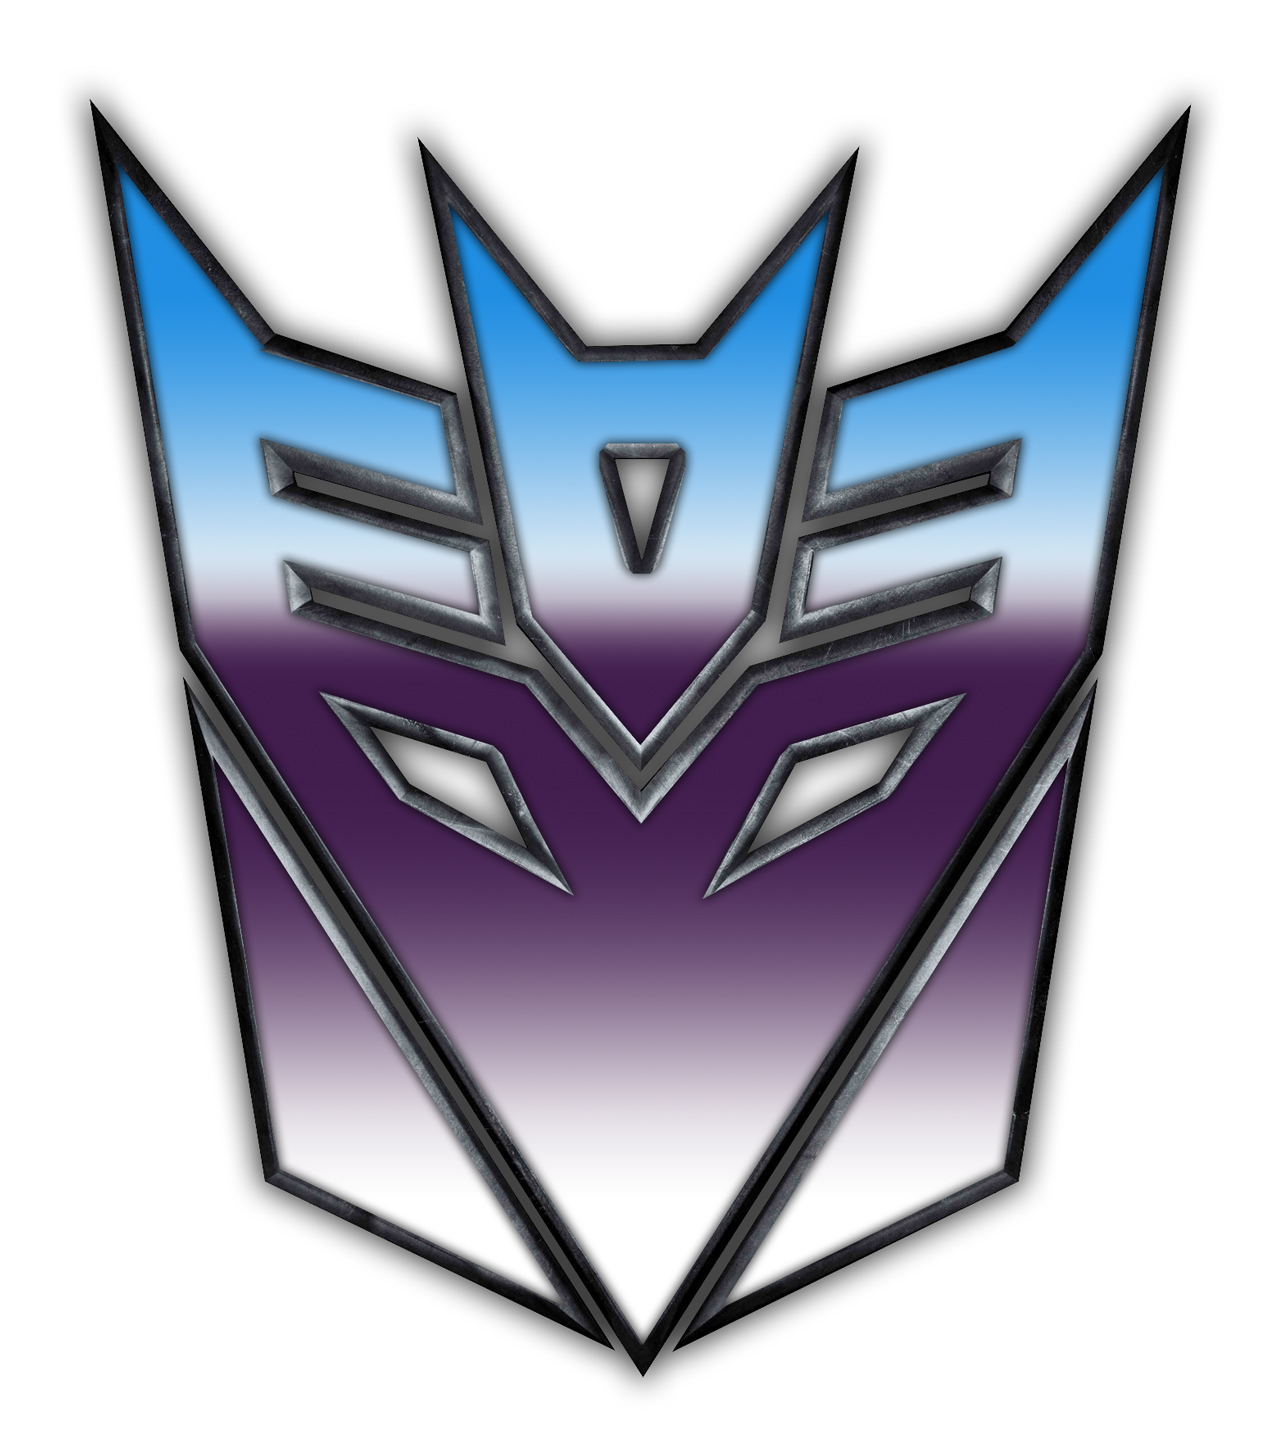 Who Was Appointed Guardian Of Cybertron In Megatron's Absence?